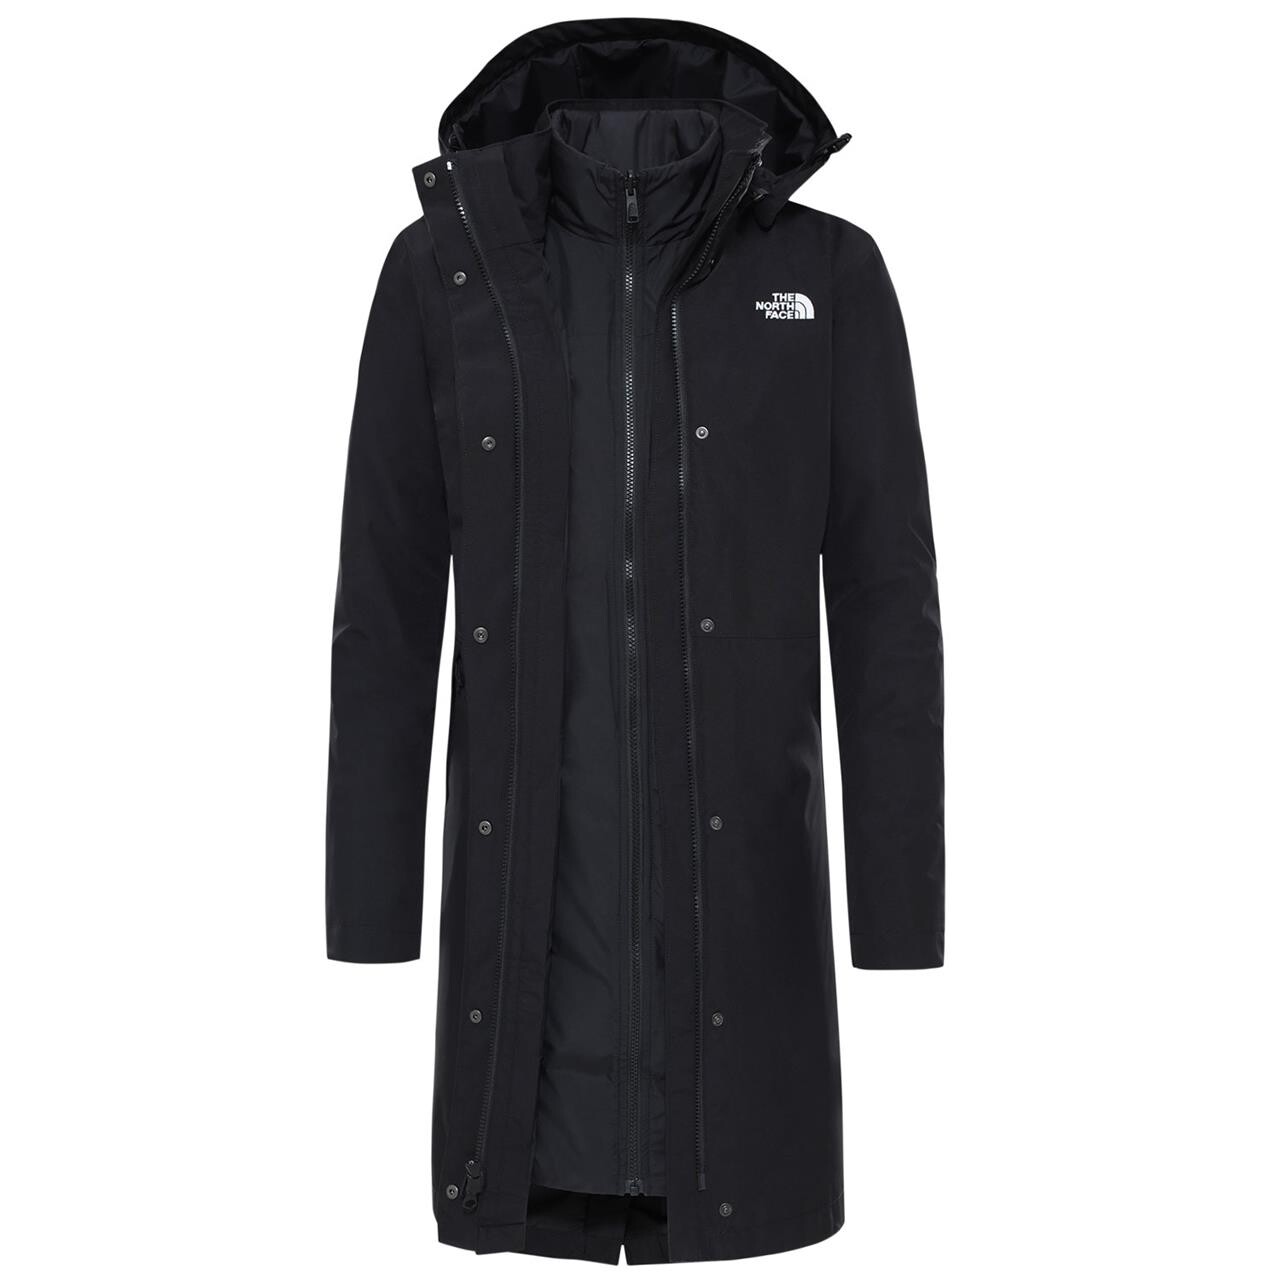 Se The North Face Womens Recycled Suzanne Triclimate Jacket (Sort (TNF BLACK/TNF BLACK) Medium) hos Friluftsland.dk